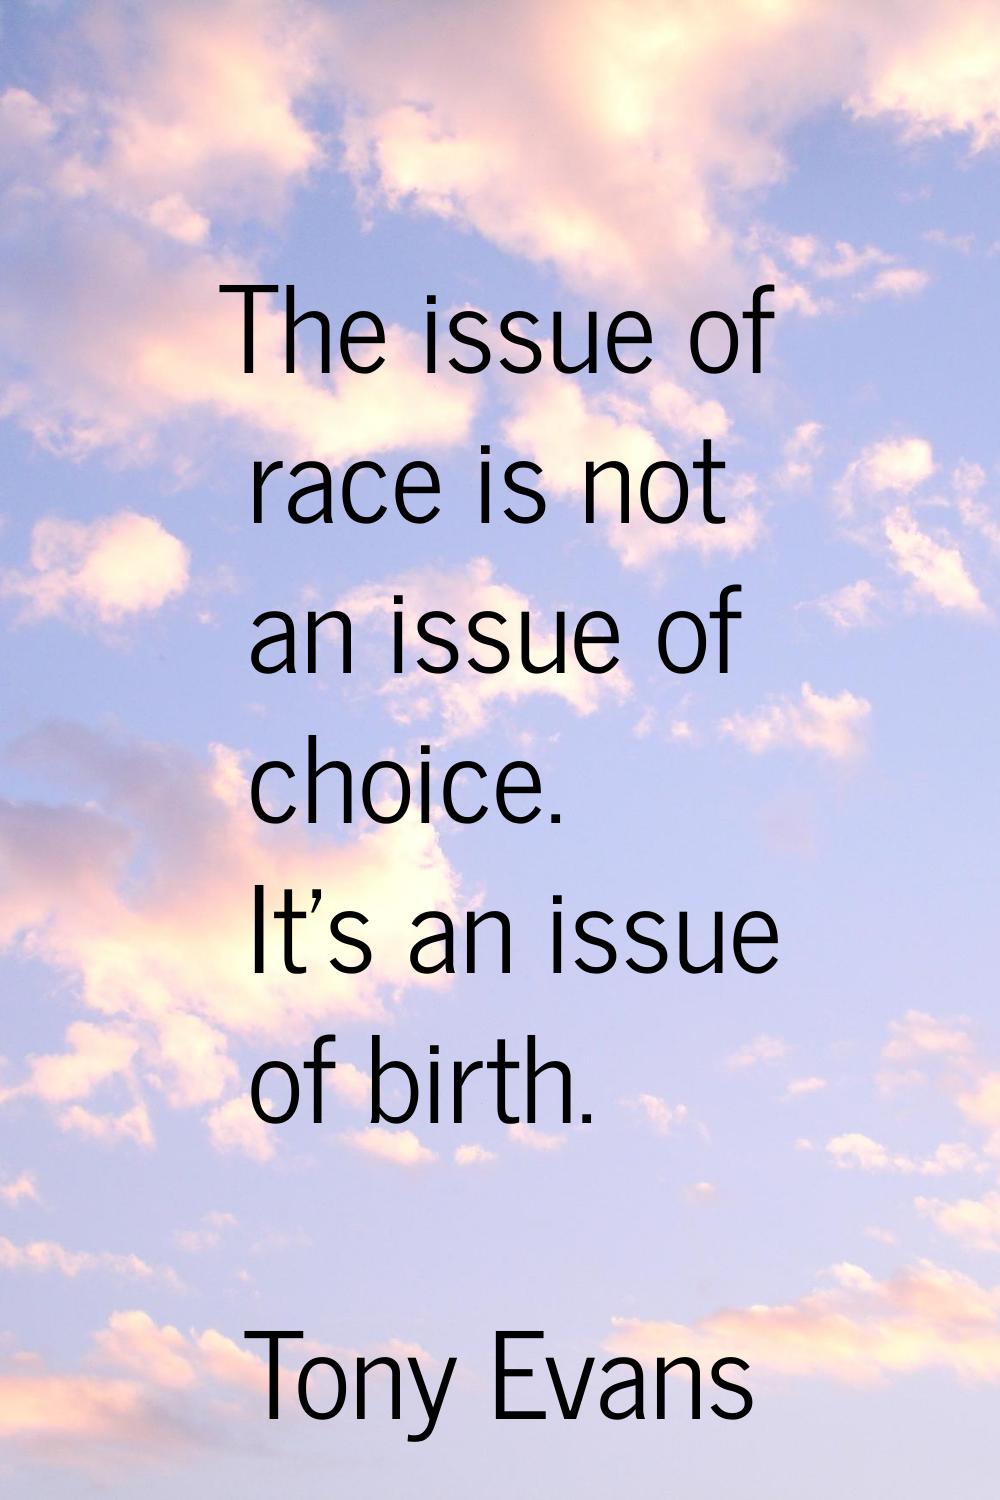 The issue of race is not an issue of choice. It's an issue of birth.